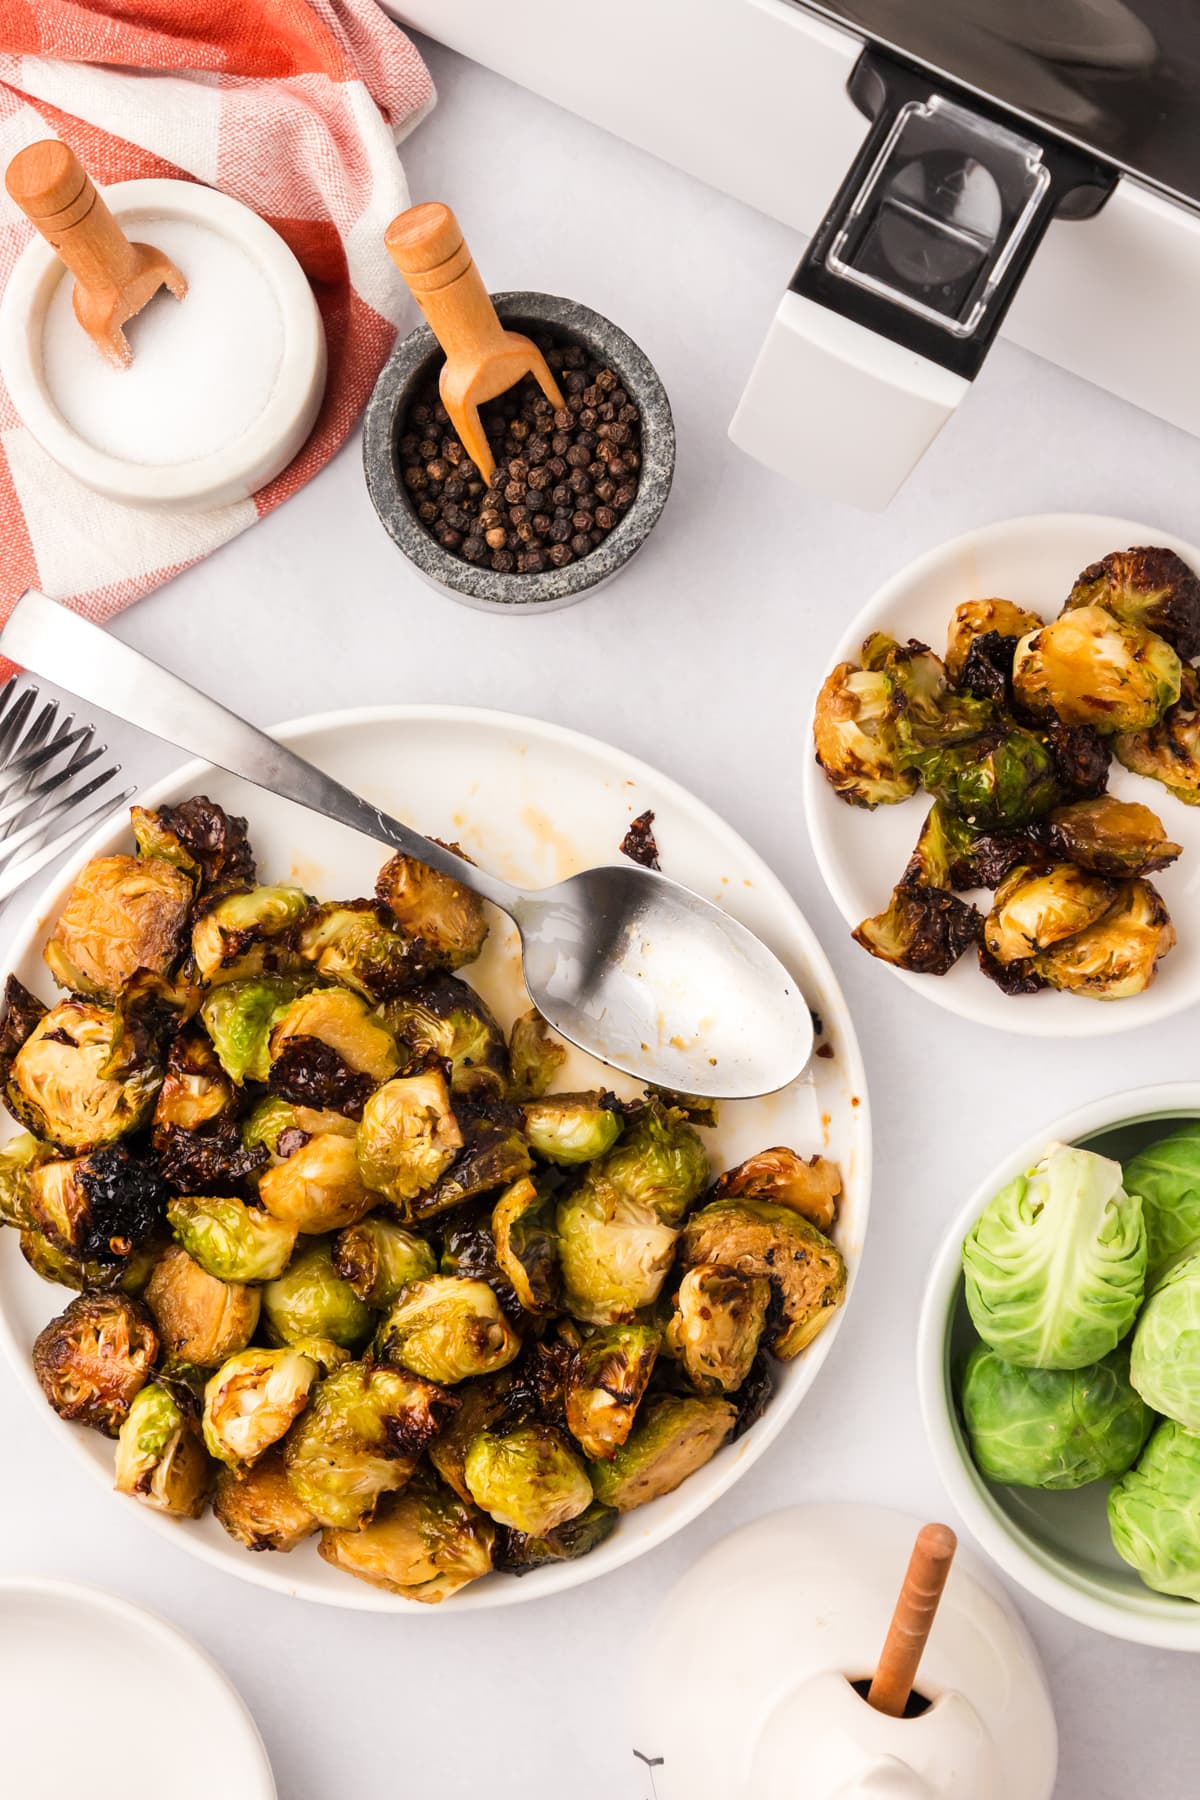 Overhead view of a plate of air fryer brussels sprouts